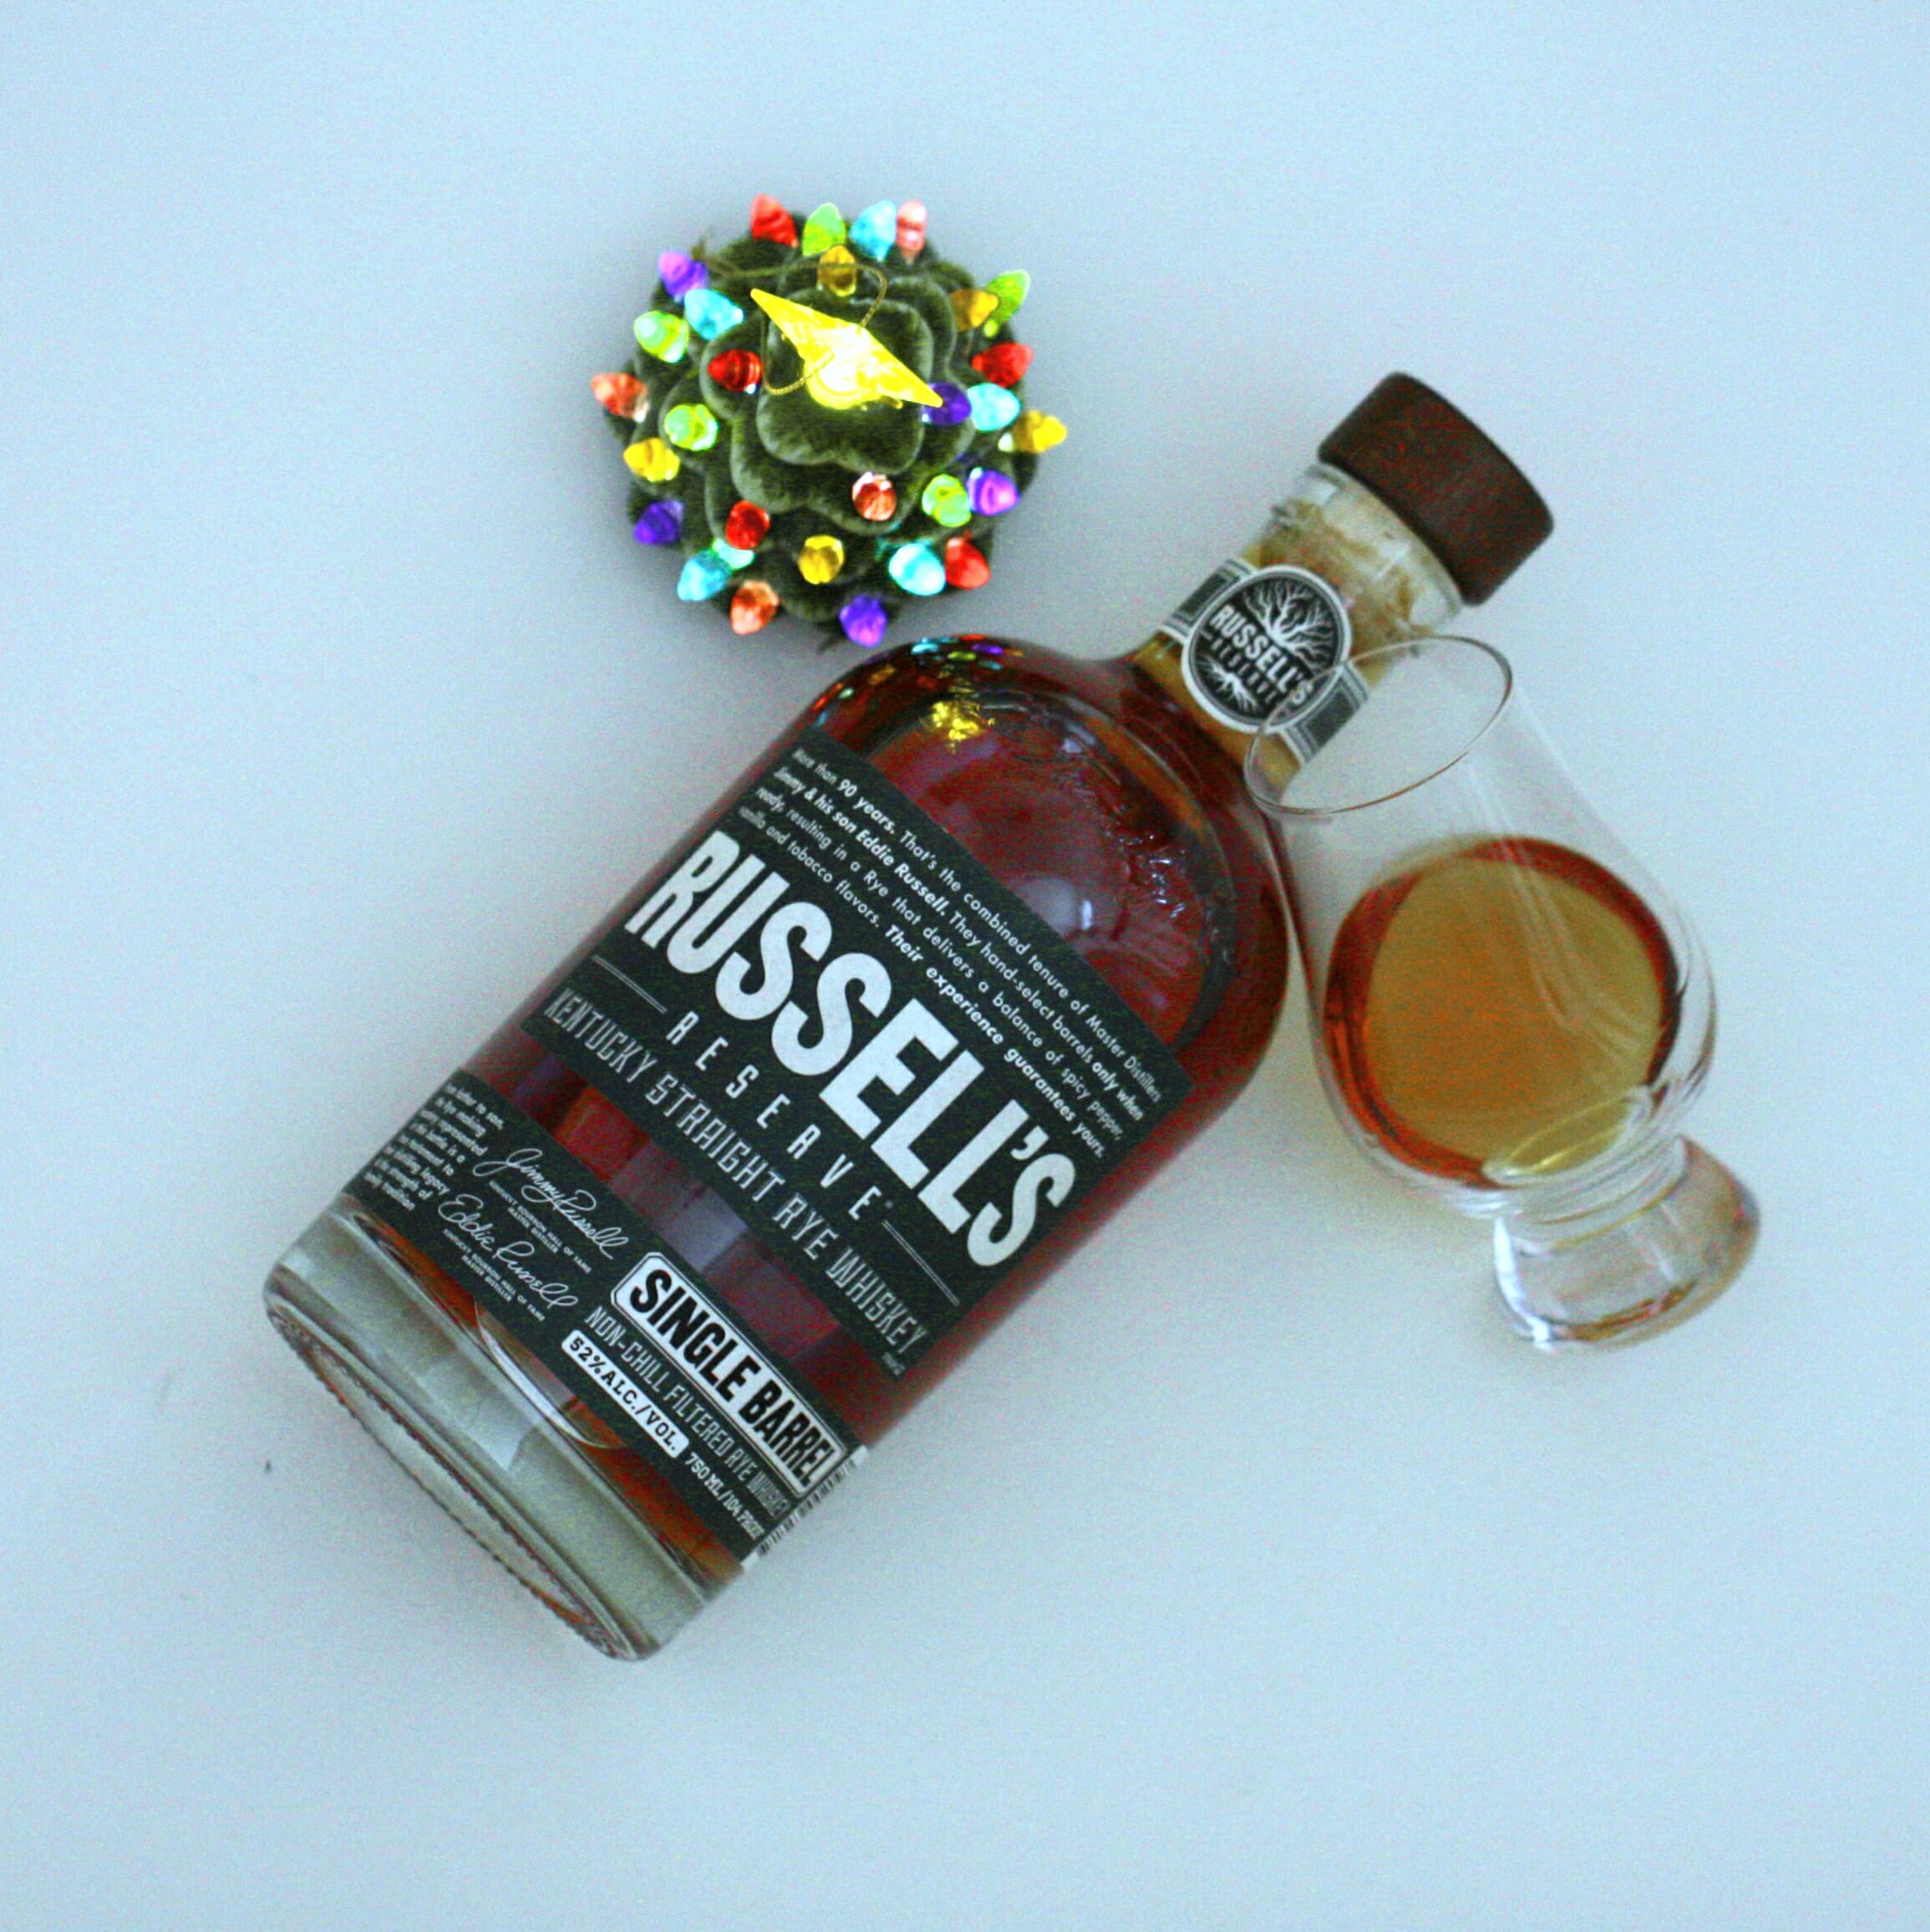 Russell’s Reserve Single Barrel Rye Whiskey Review